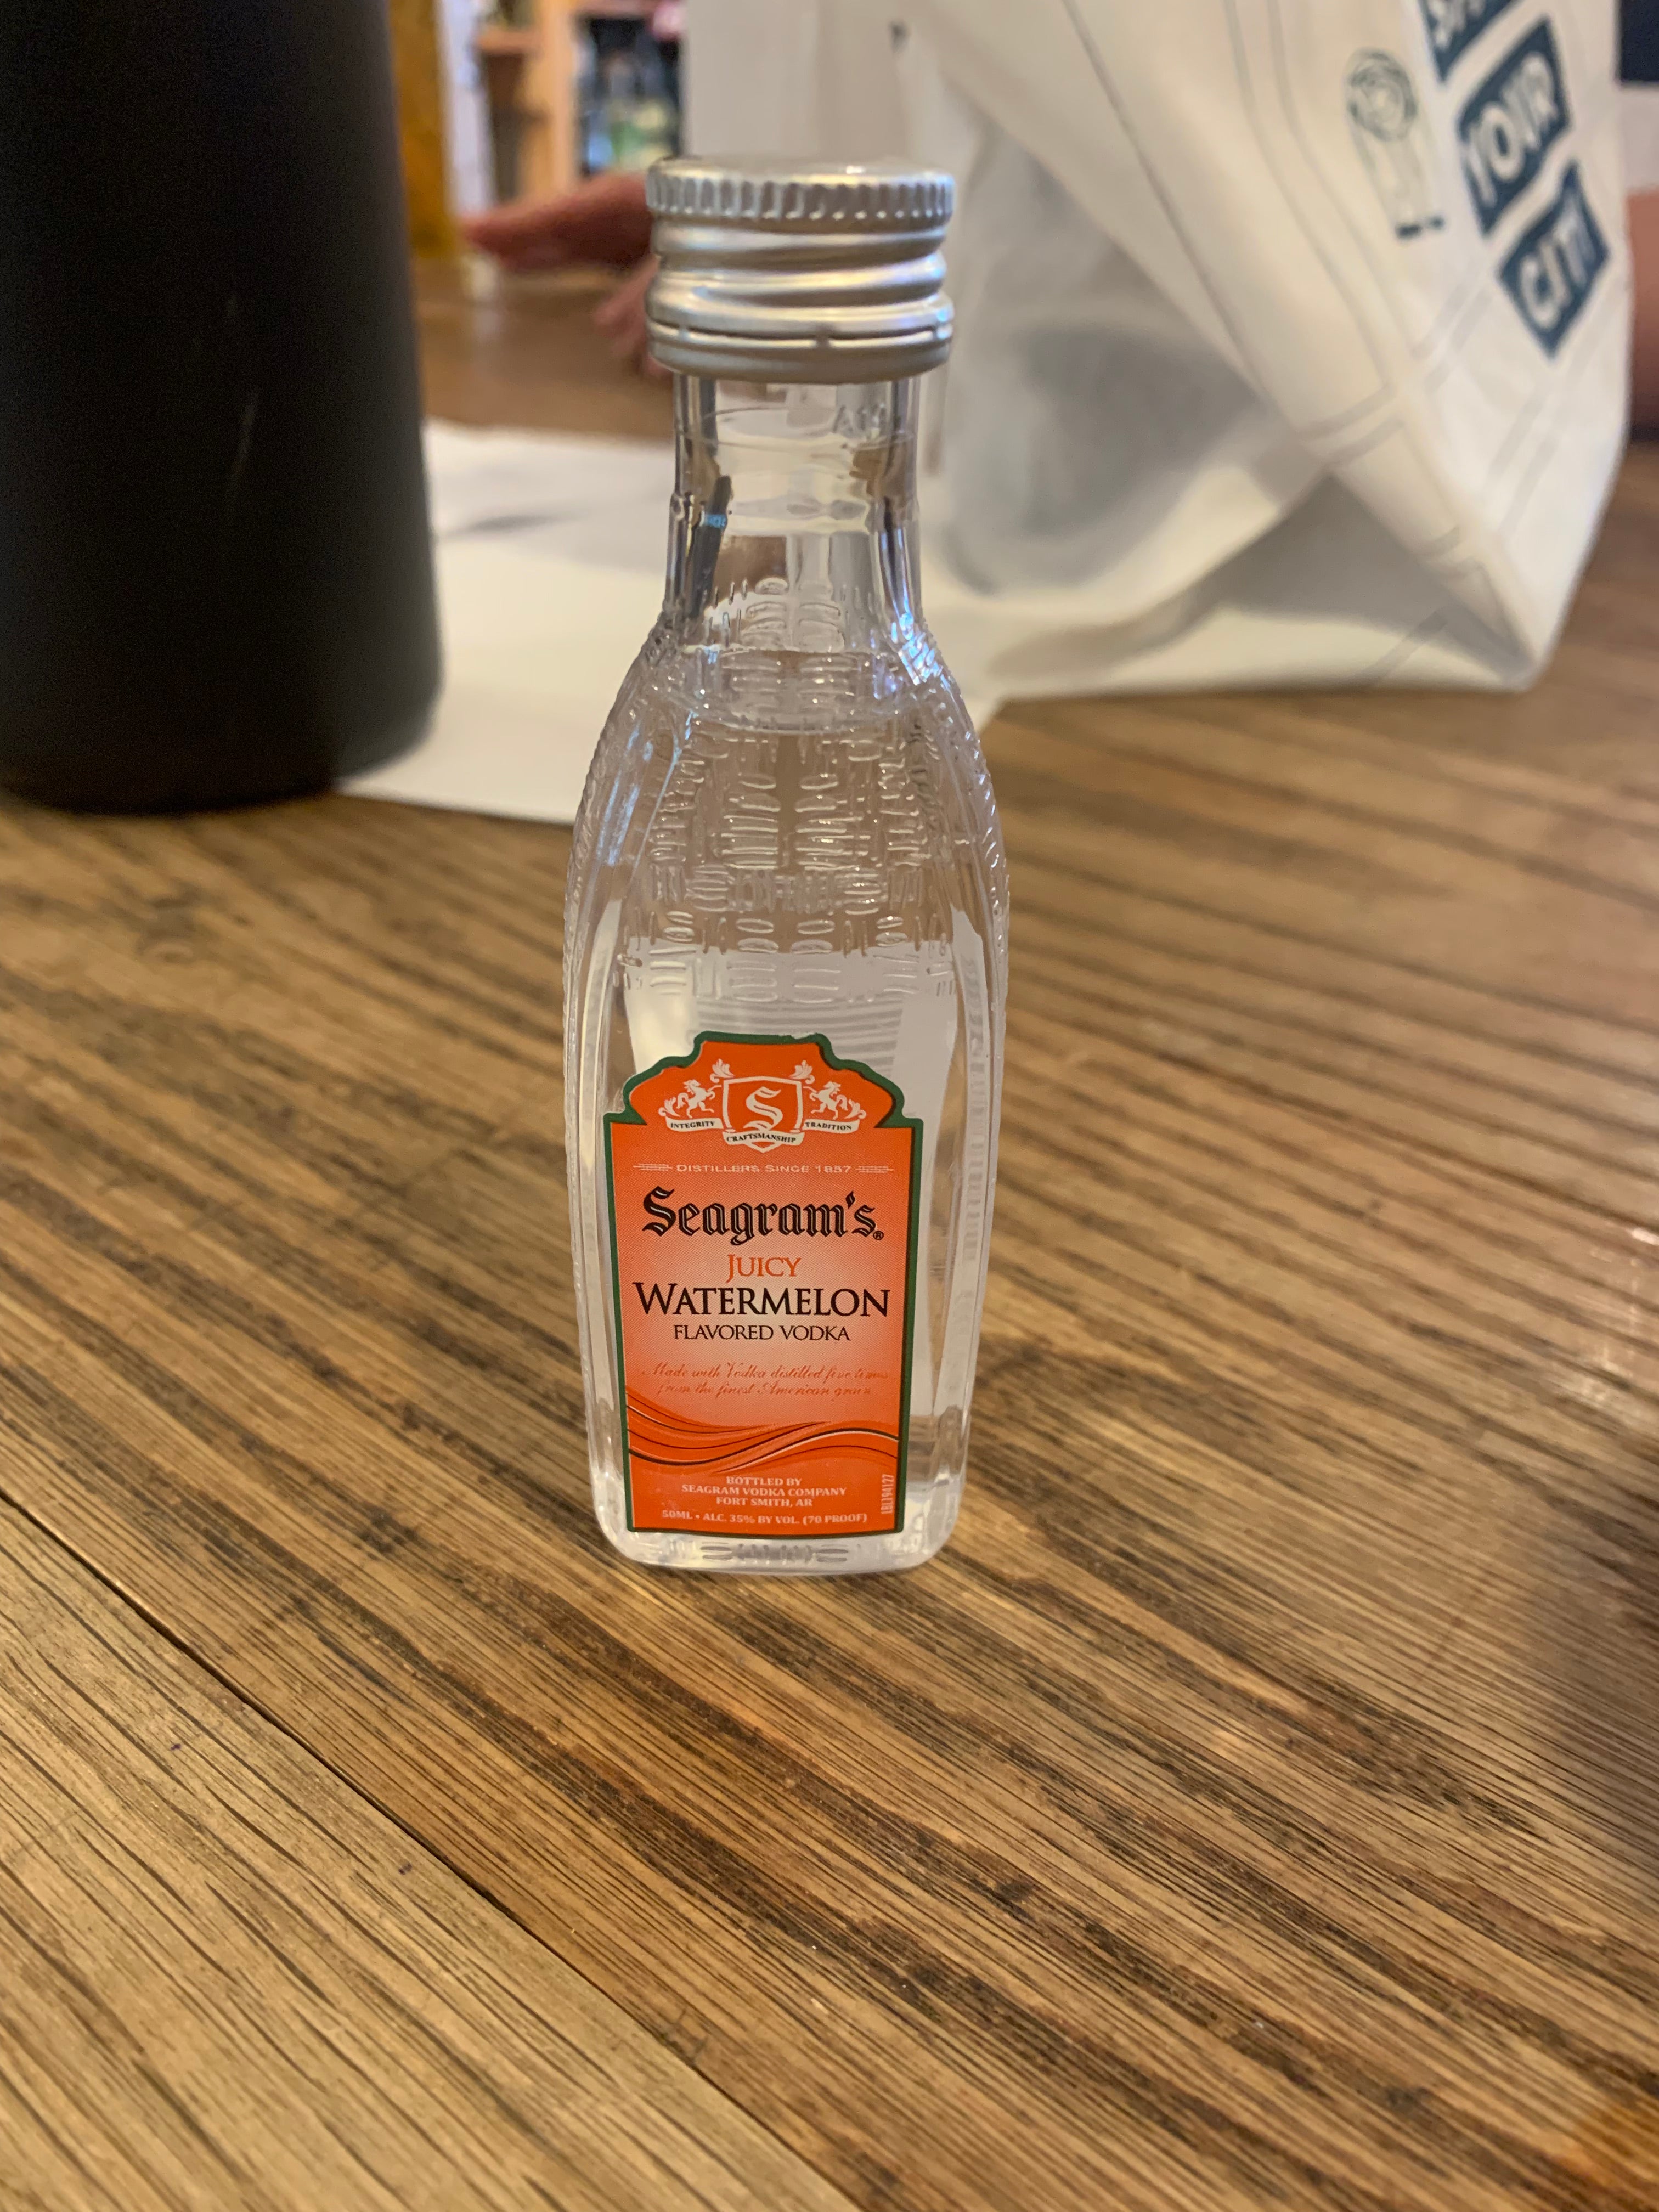 Seagrams Juicy Watermelon 50mL a small squarish plastic bottle with an orange label and silver top